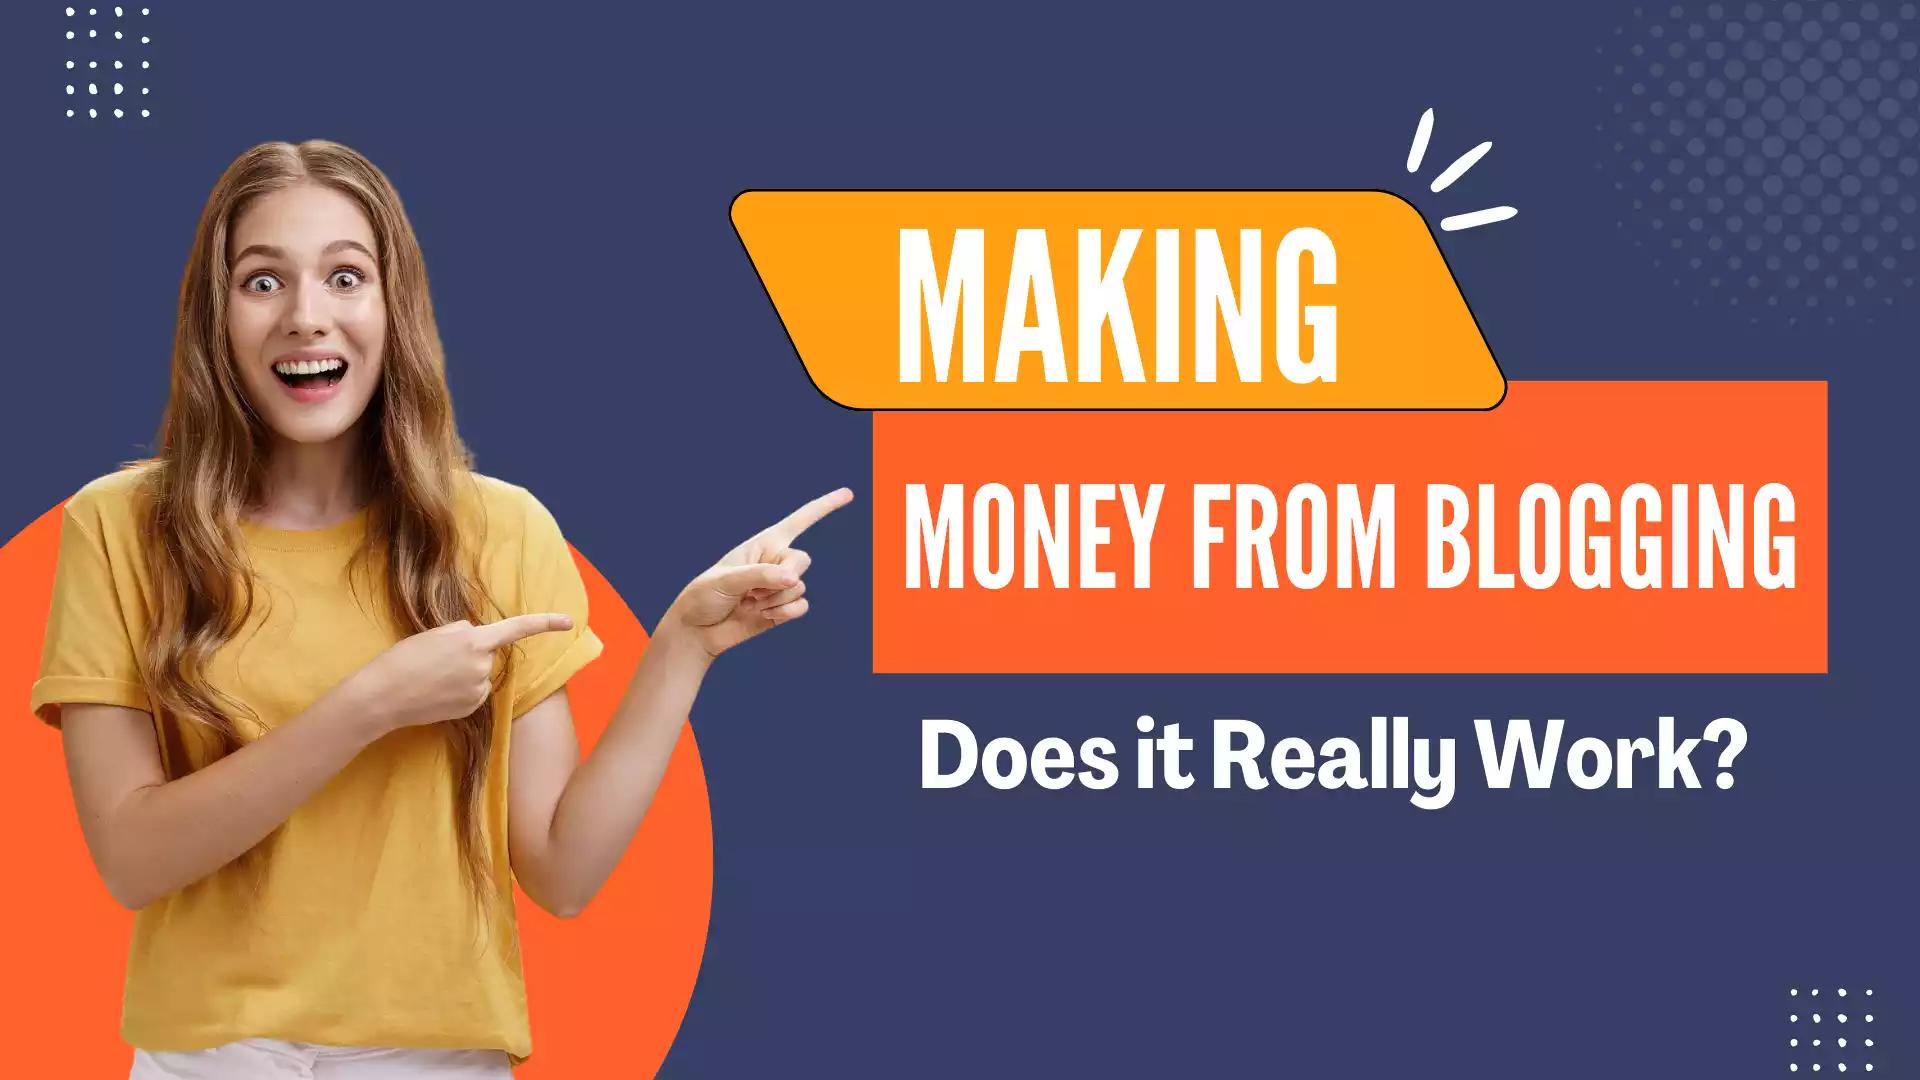 Making money blogging - Does it really work